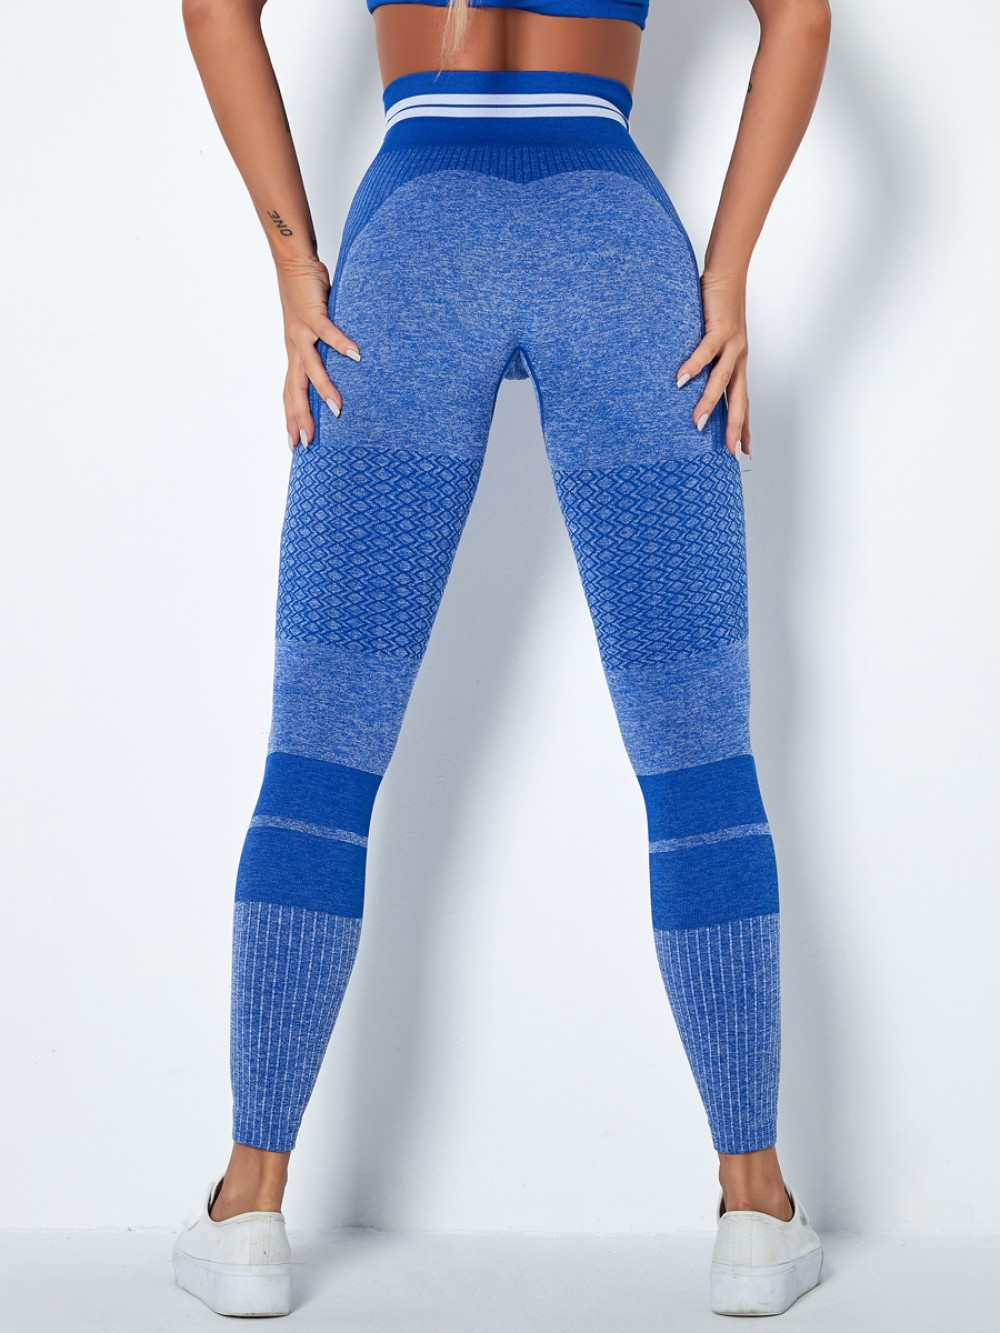 Fitted Blue Wide Waistband Full Length Sports Leggings Athletic Comfort